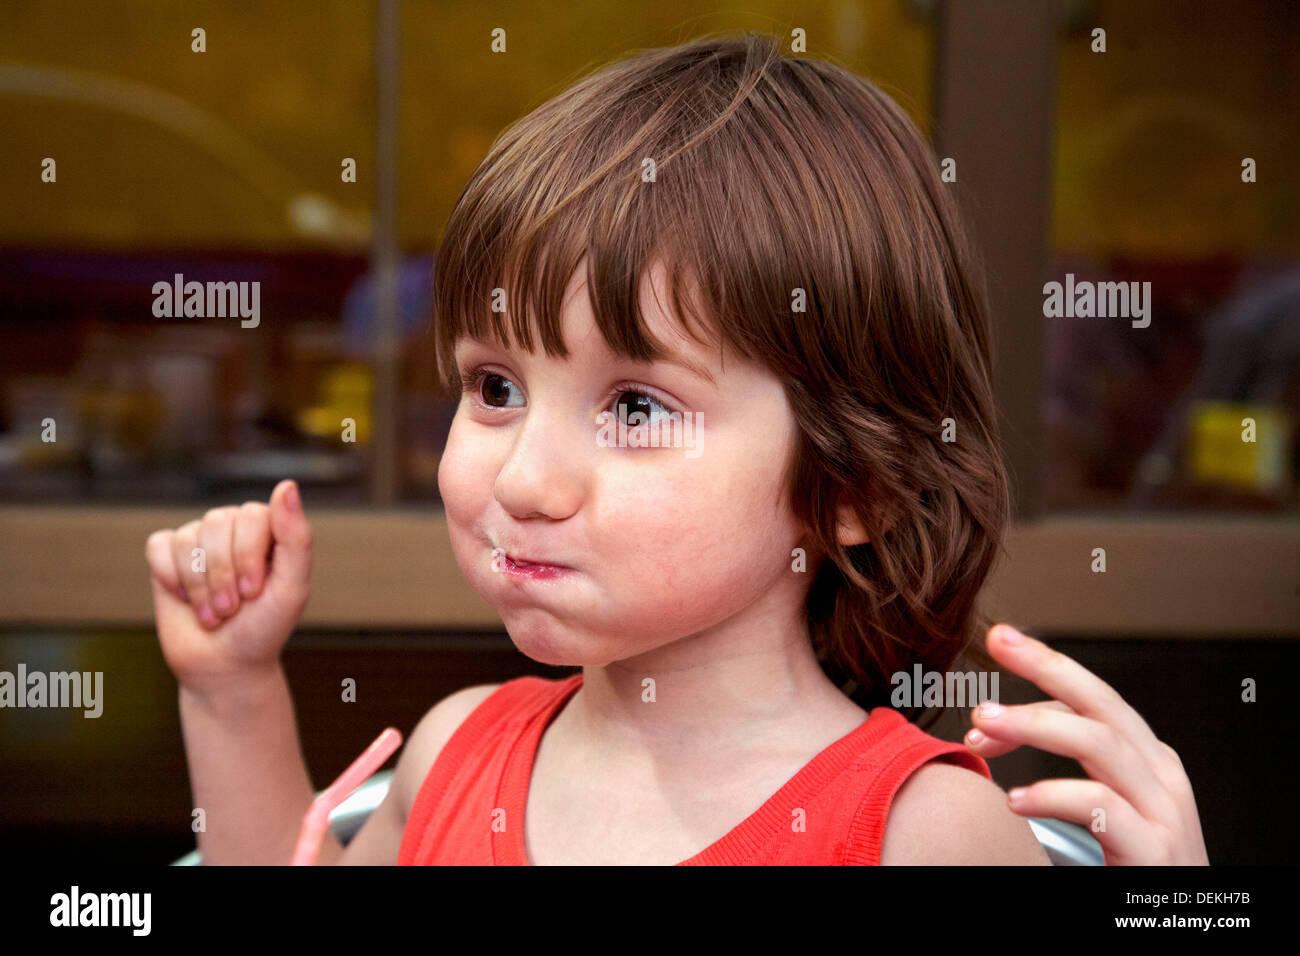 4 year old boy making a silly face, Barcelona, Spain. Stock Photo